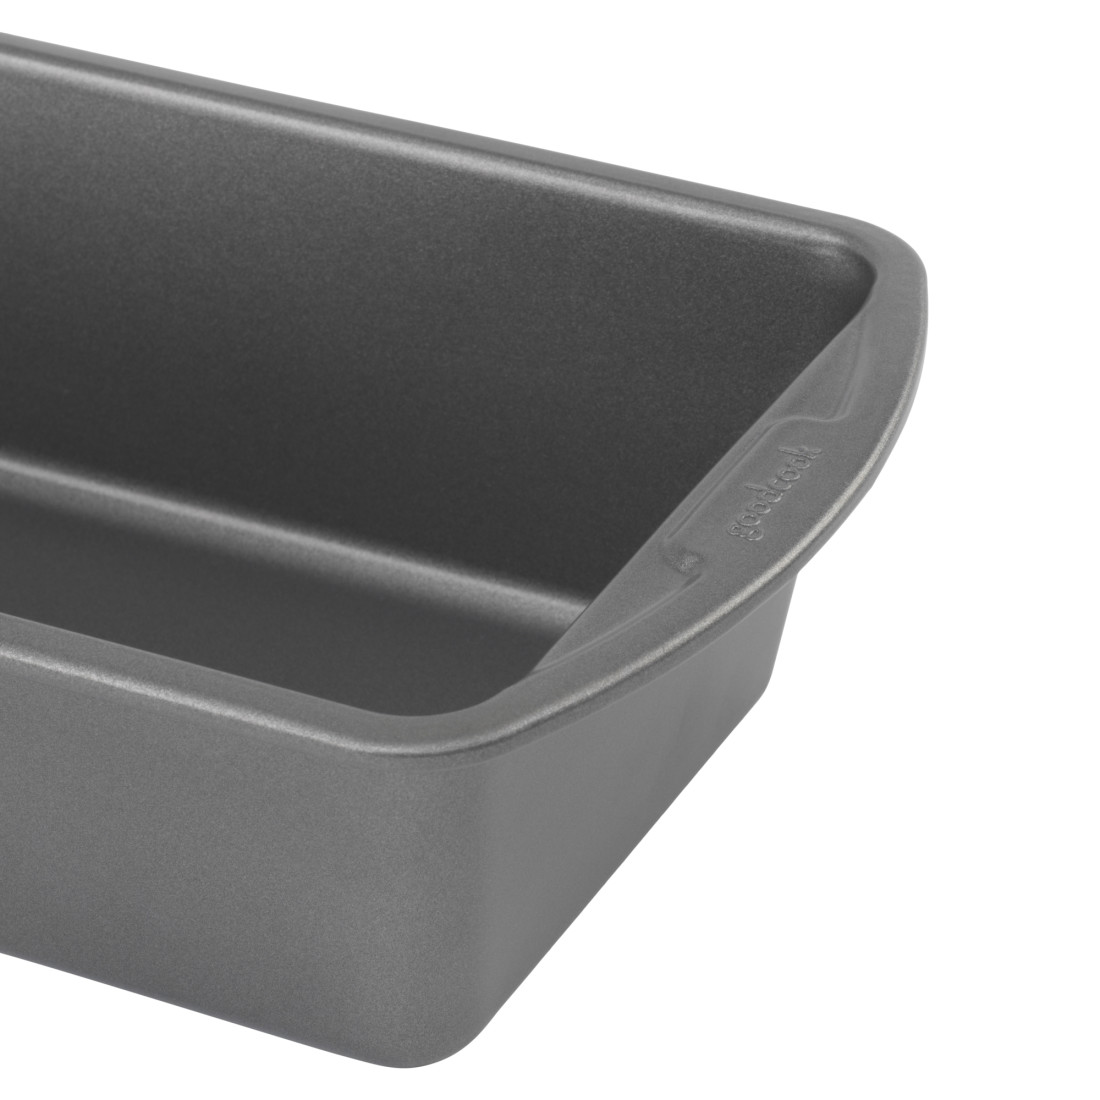 GoodCook Set of 2 Extra Large 13'' x 5'' Nonstick Steel Bread Loaf Pans,  Gray 